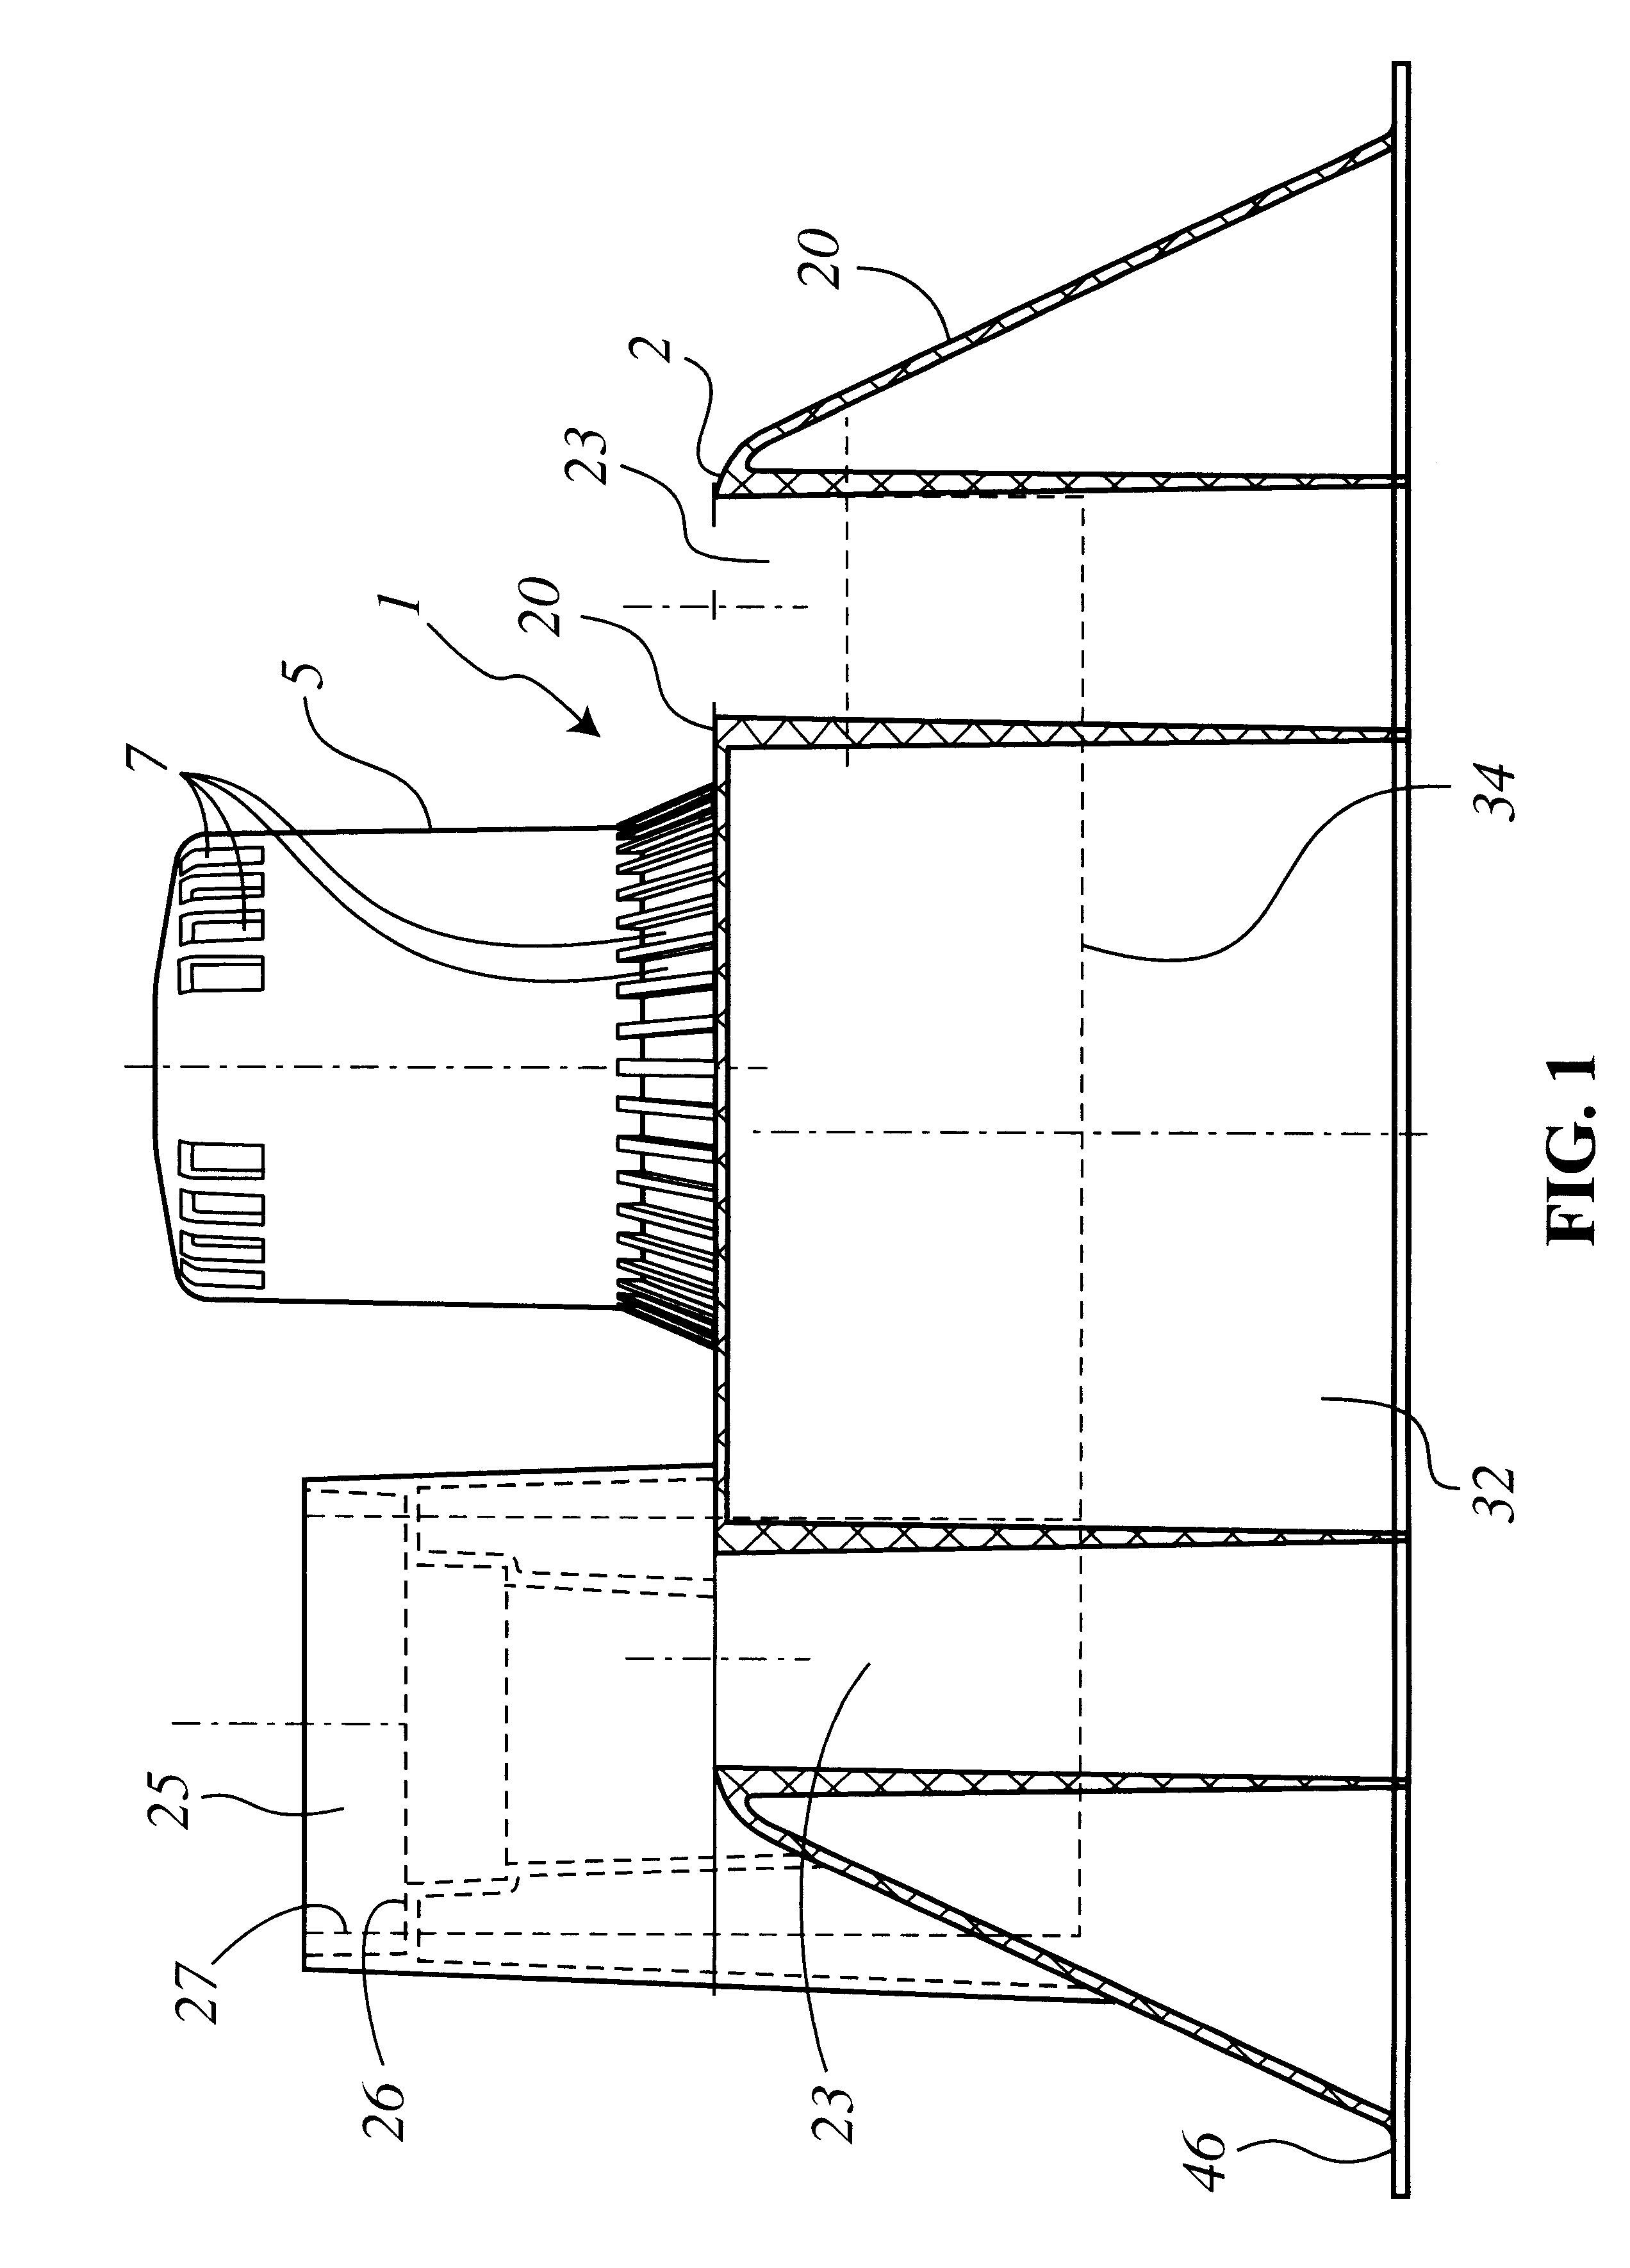 Method and apparatus for providing dilution air to a blower motor